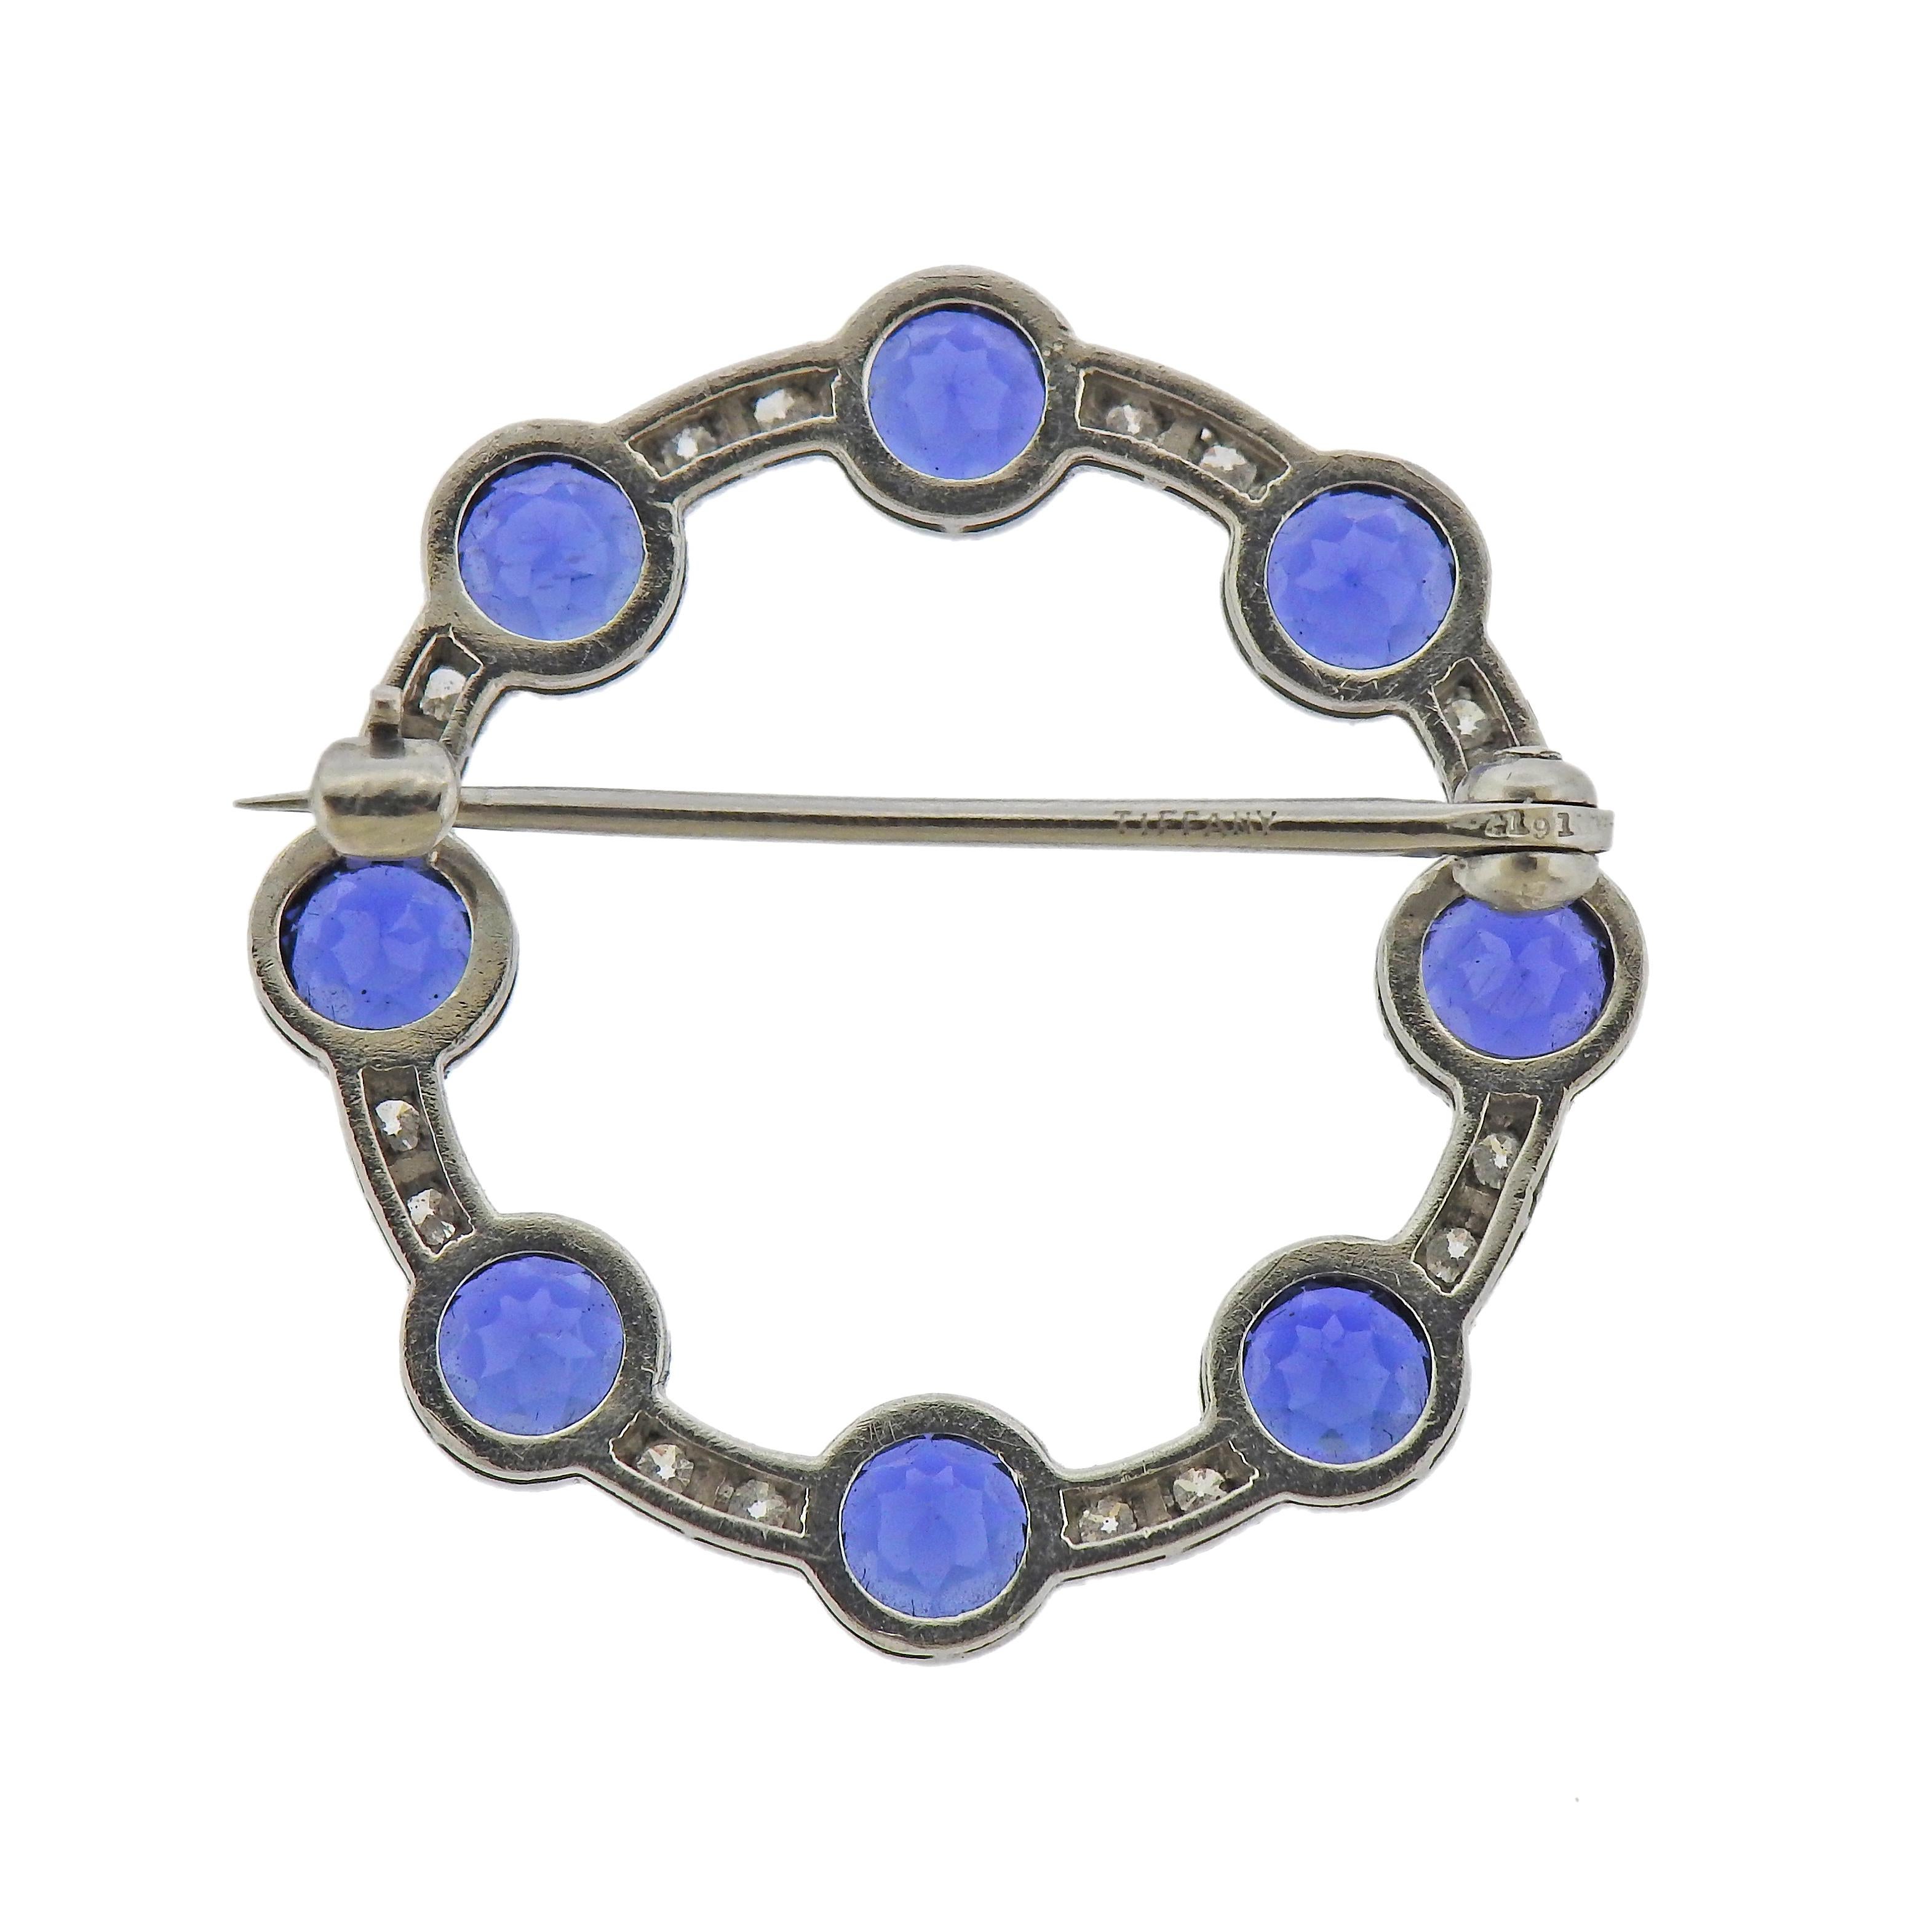 Platinum circle brooch by Tiffany & Co, with eight approx. 5mm sapphires and 0.16ctw in diamonds. Brooch is 30mm in diameter. Marked: Tiffany, 2191. Weight - 7.2 grams. 